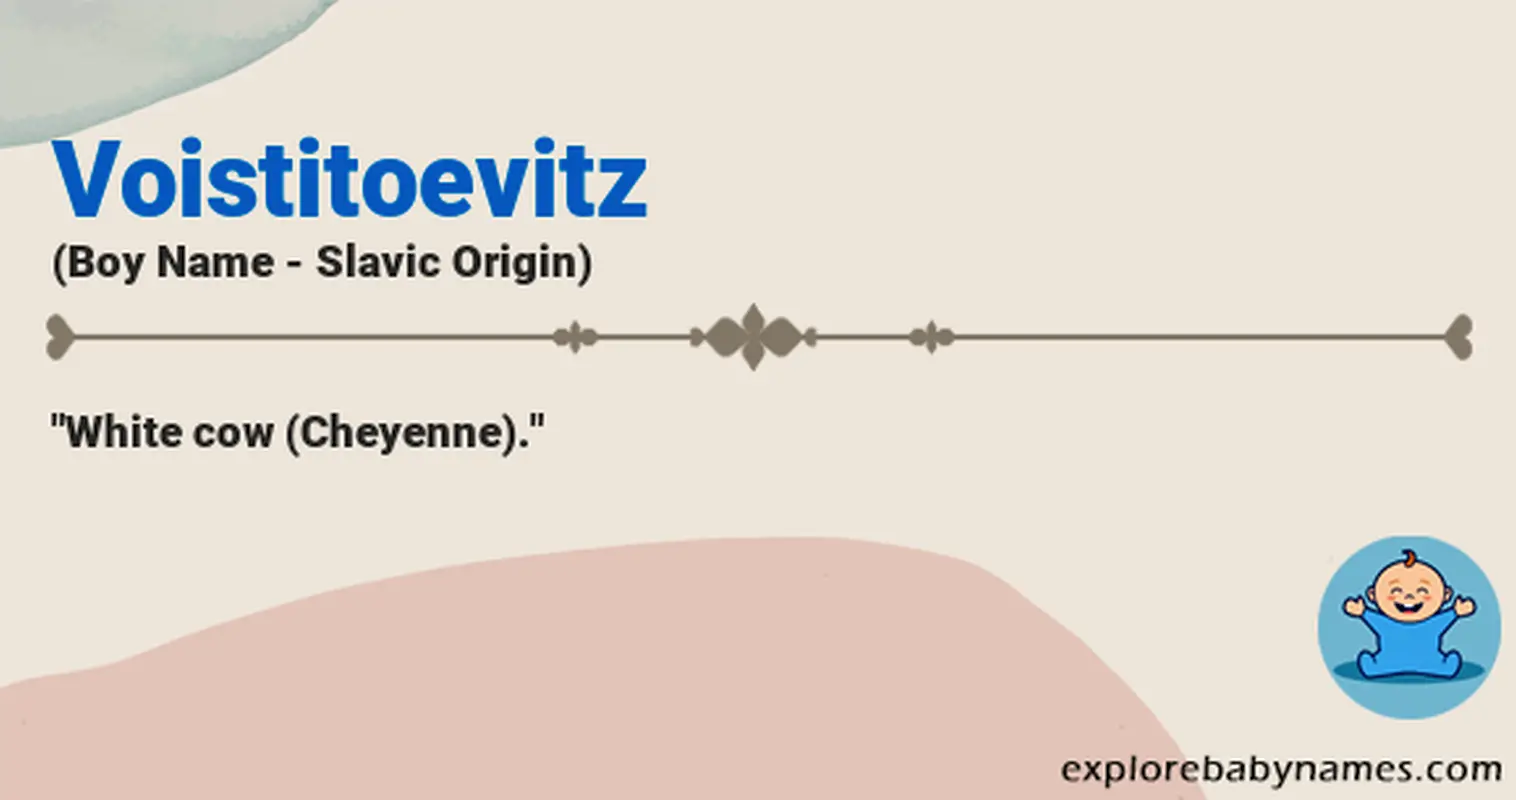 Meaning of Voistitoevitz